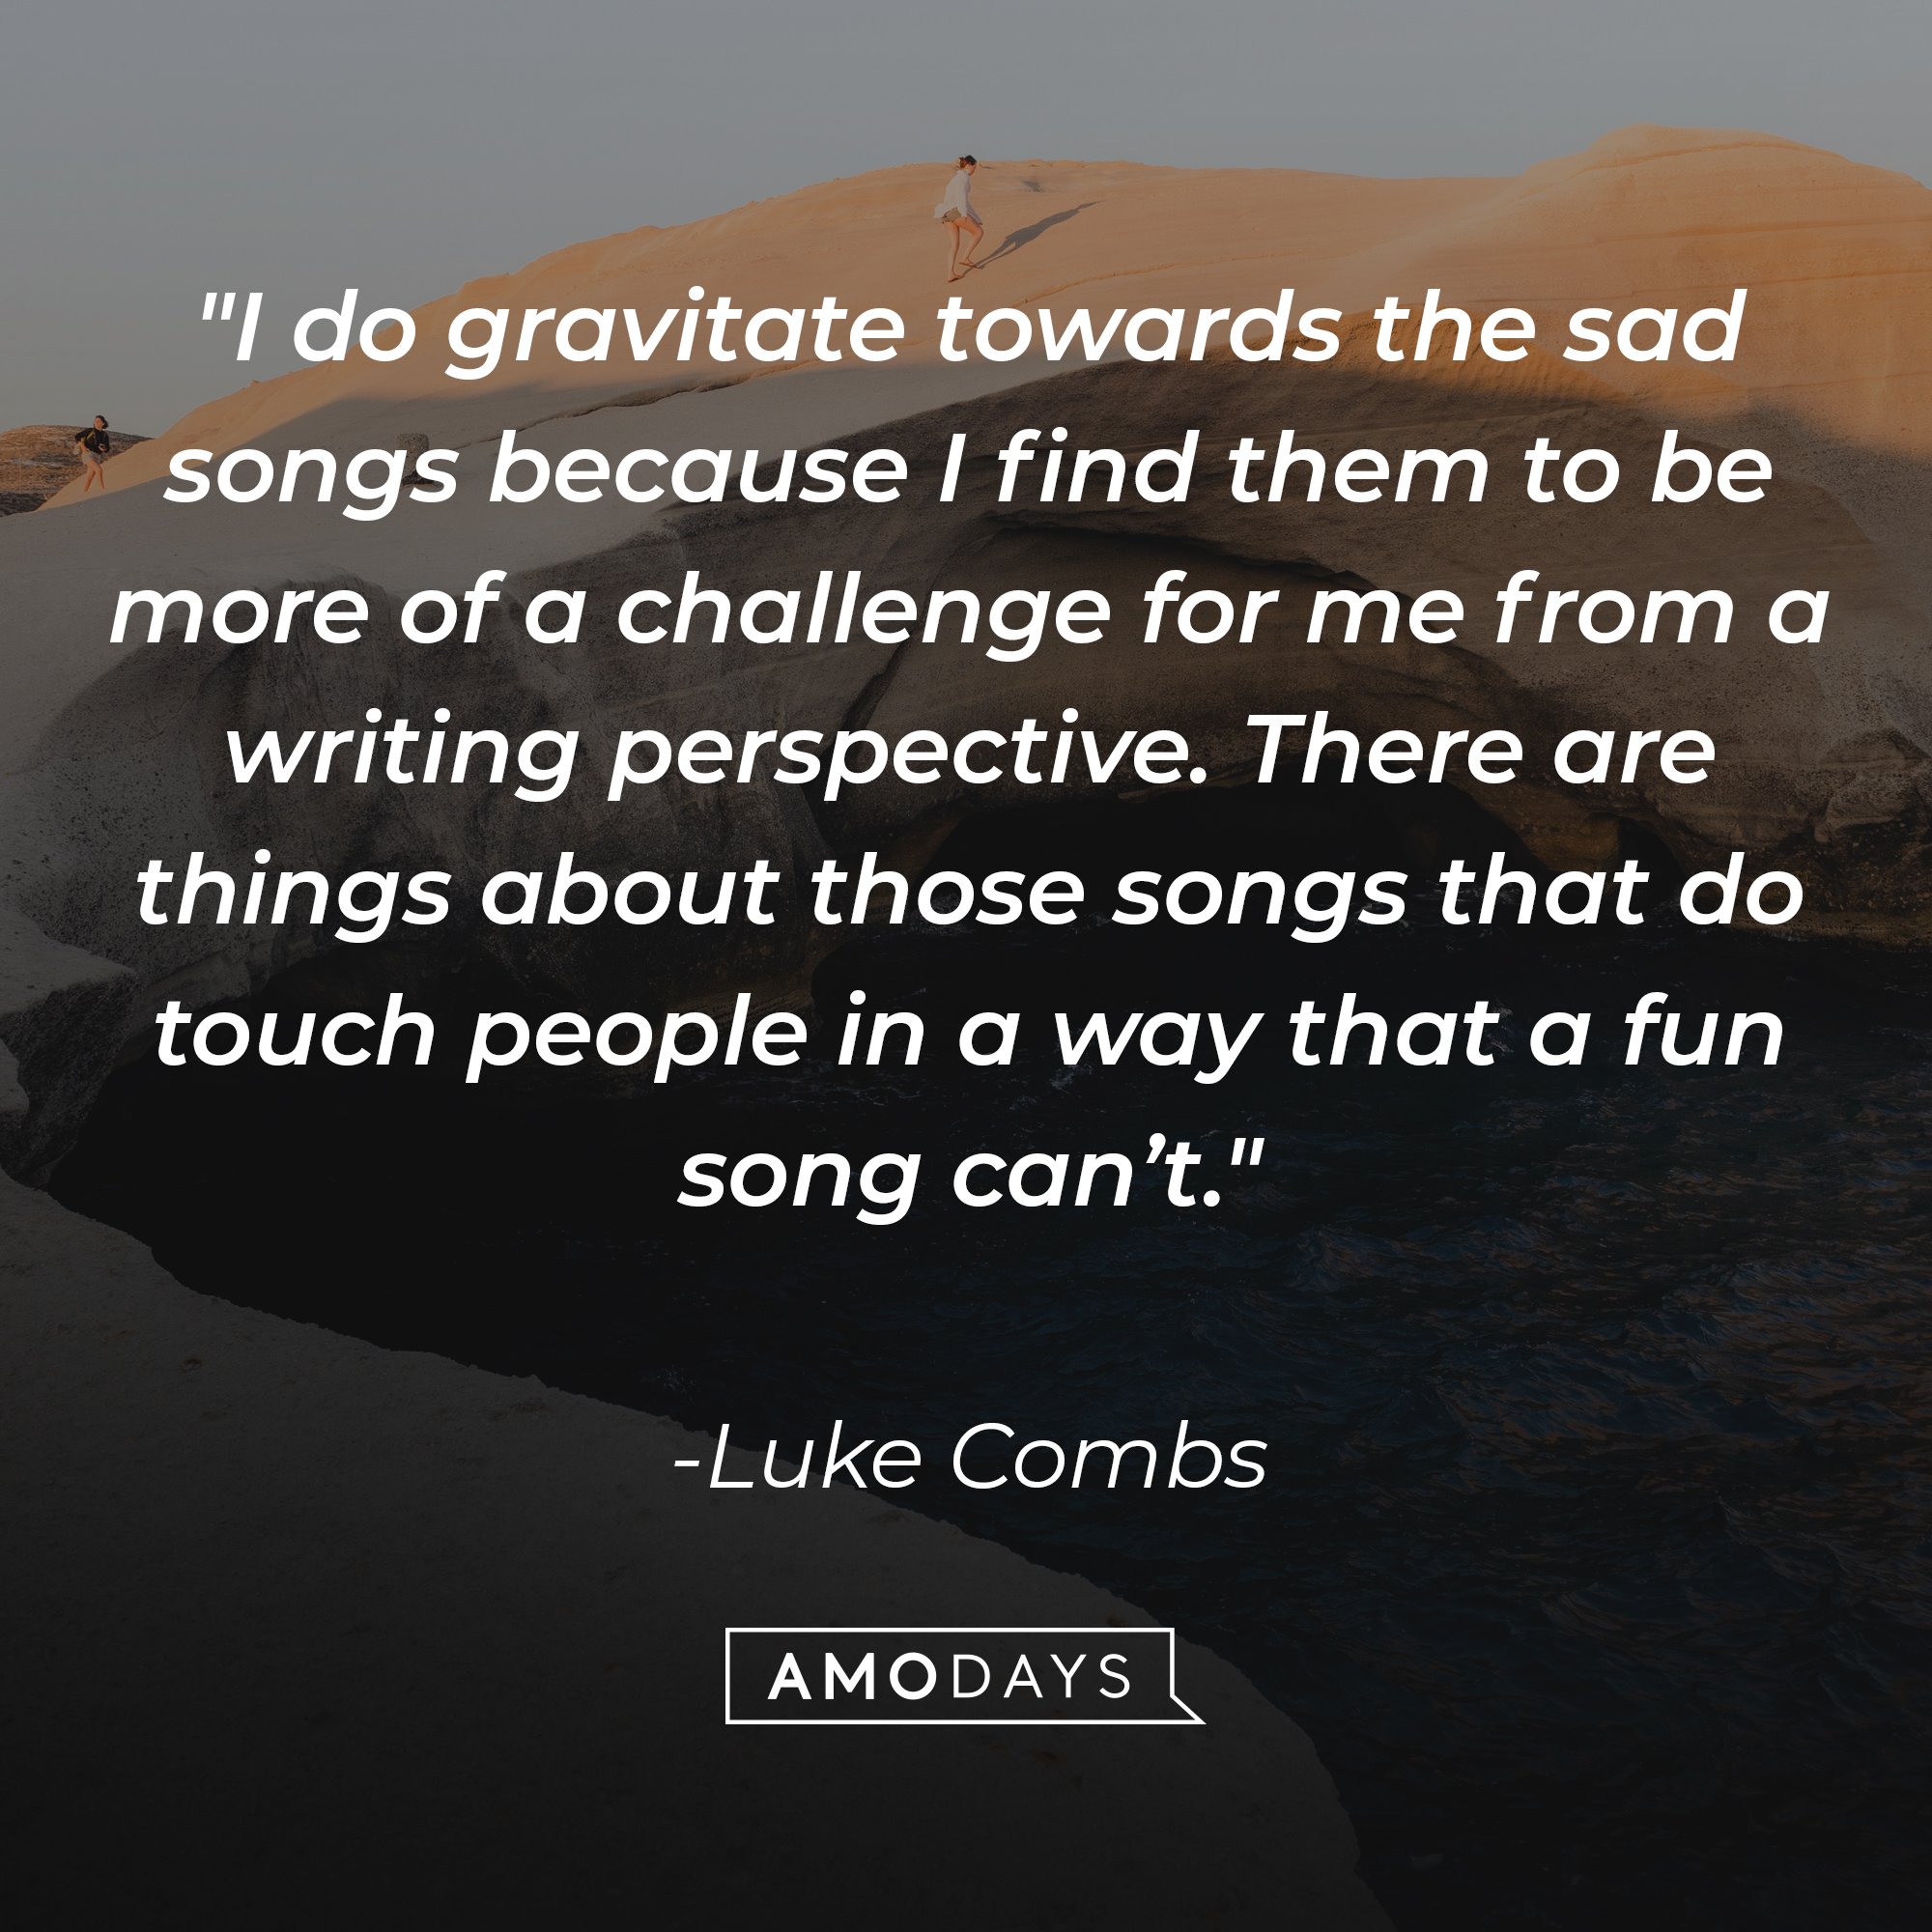 Luke Combs's quote "I do gravitate towards the sad songs because I find them to be more of a challenge for me from a writing perspective. There are things about those songs that do touch people in a way that a fun song can’t." | Source: Unsplash.com